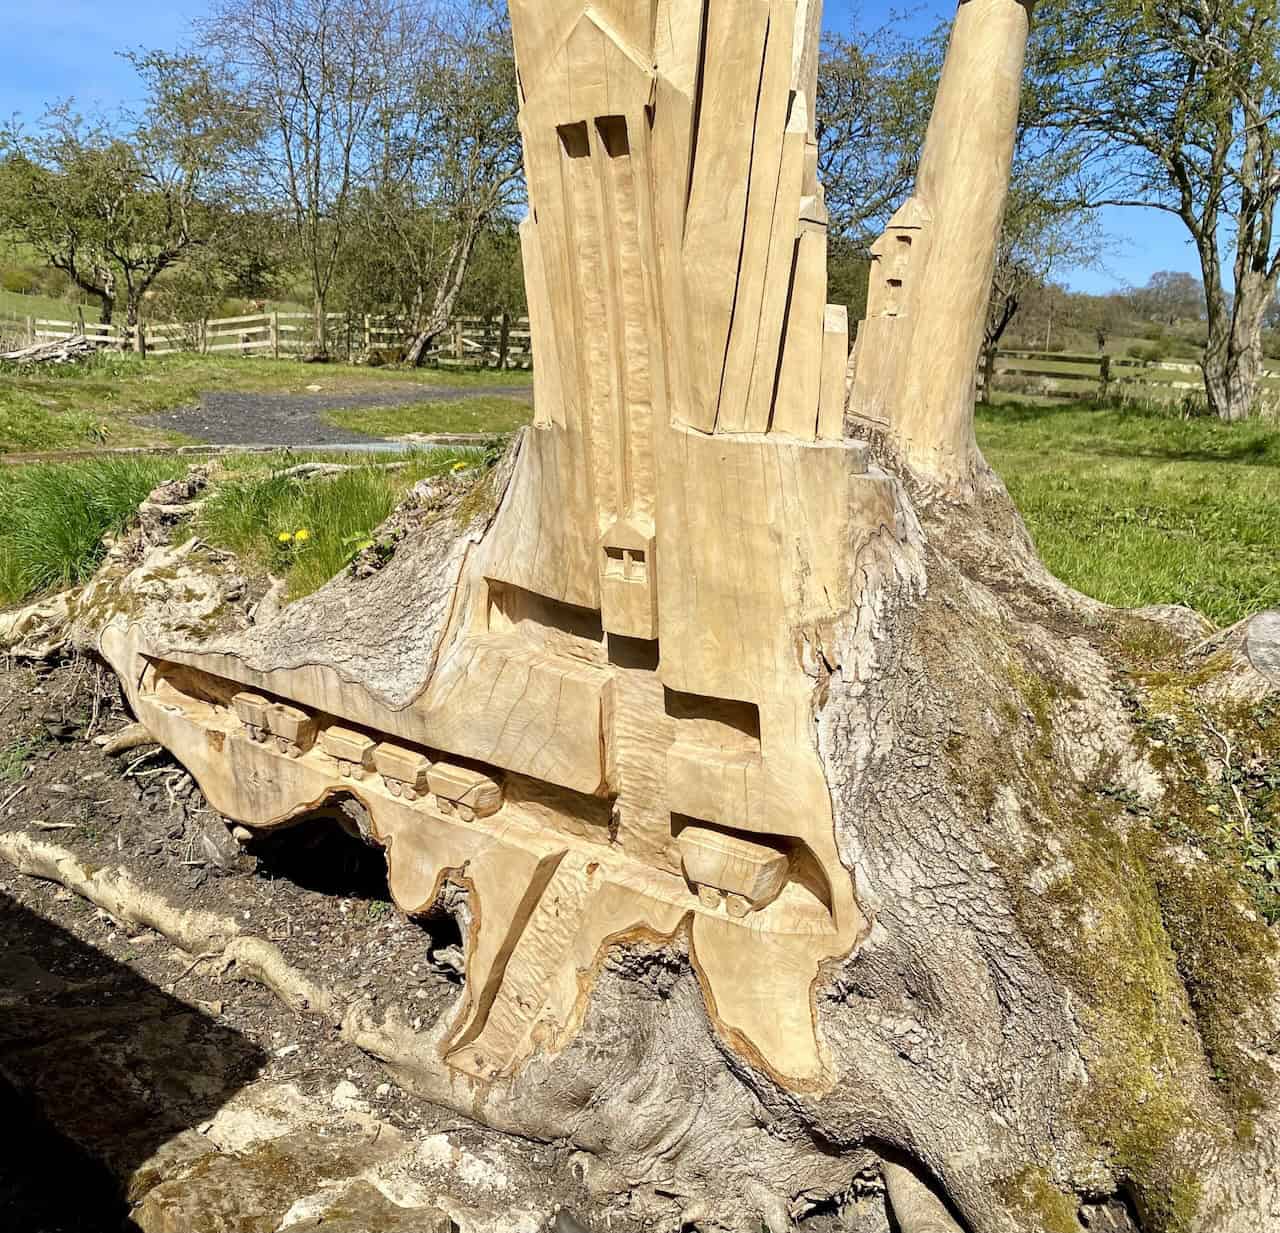 Amazing wood carvings at the site of the Esk Valley ironstone mine can be found along the Goathland to Grosmont Rail Trail.